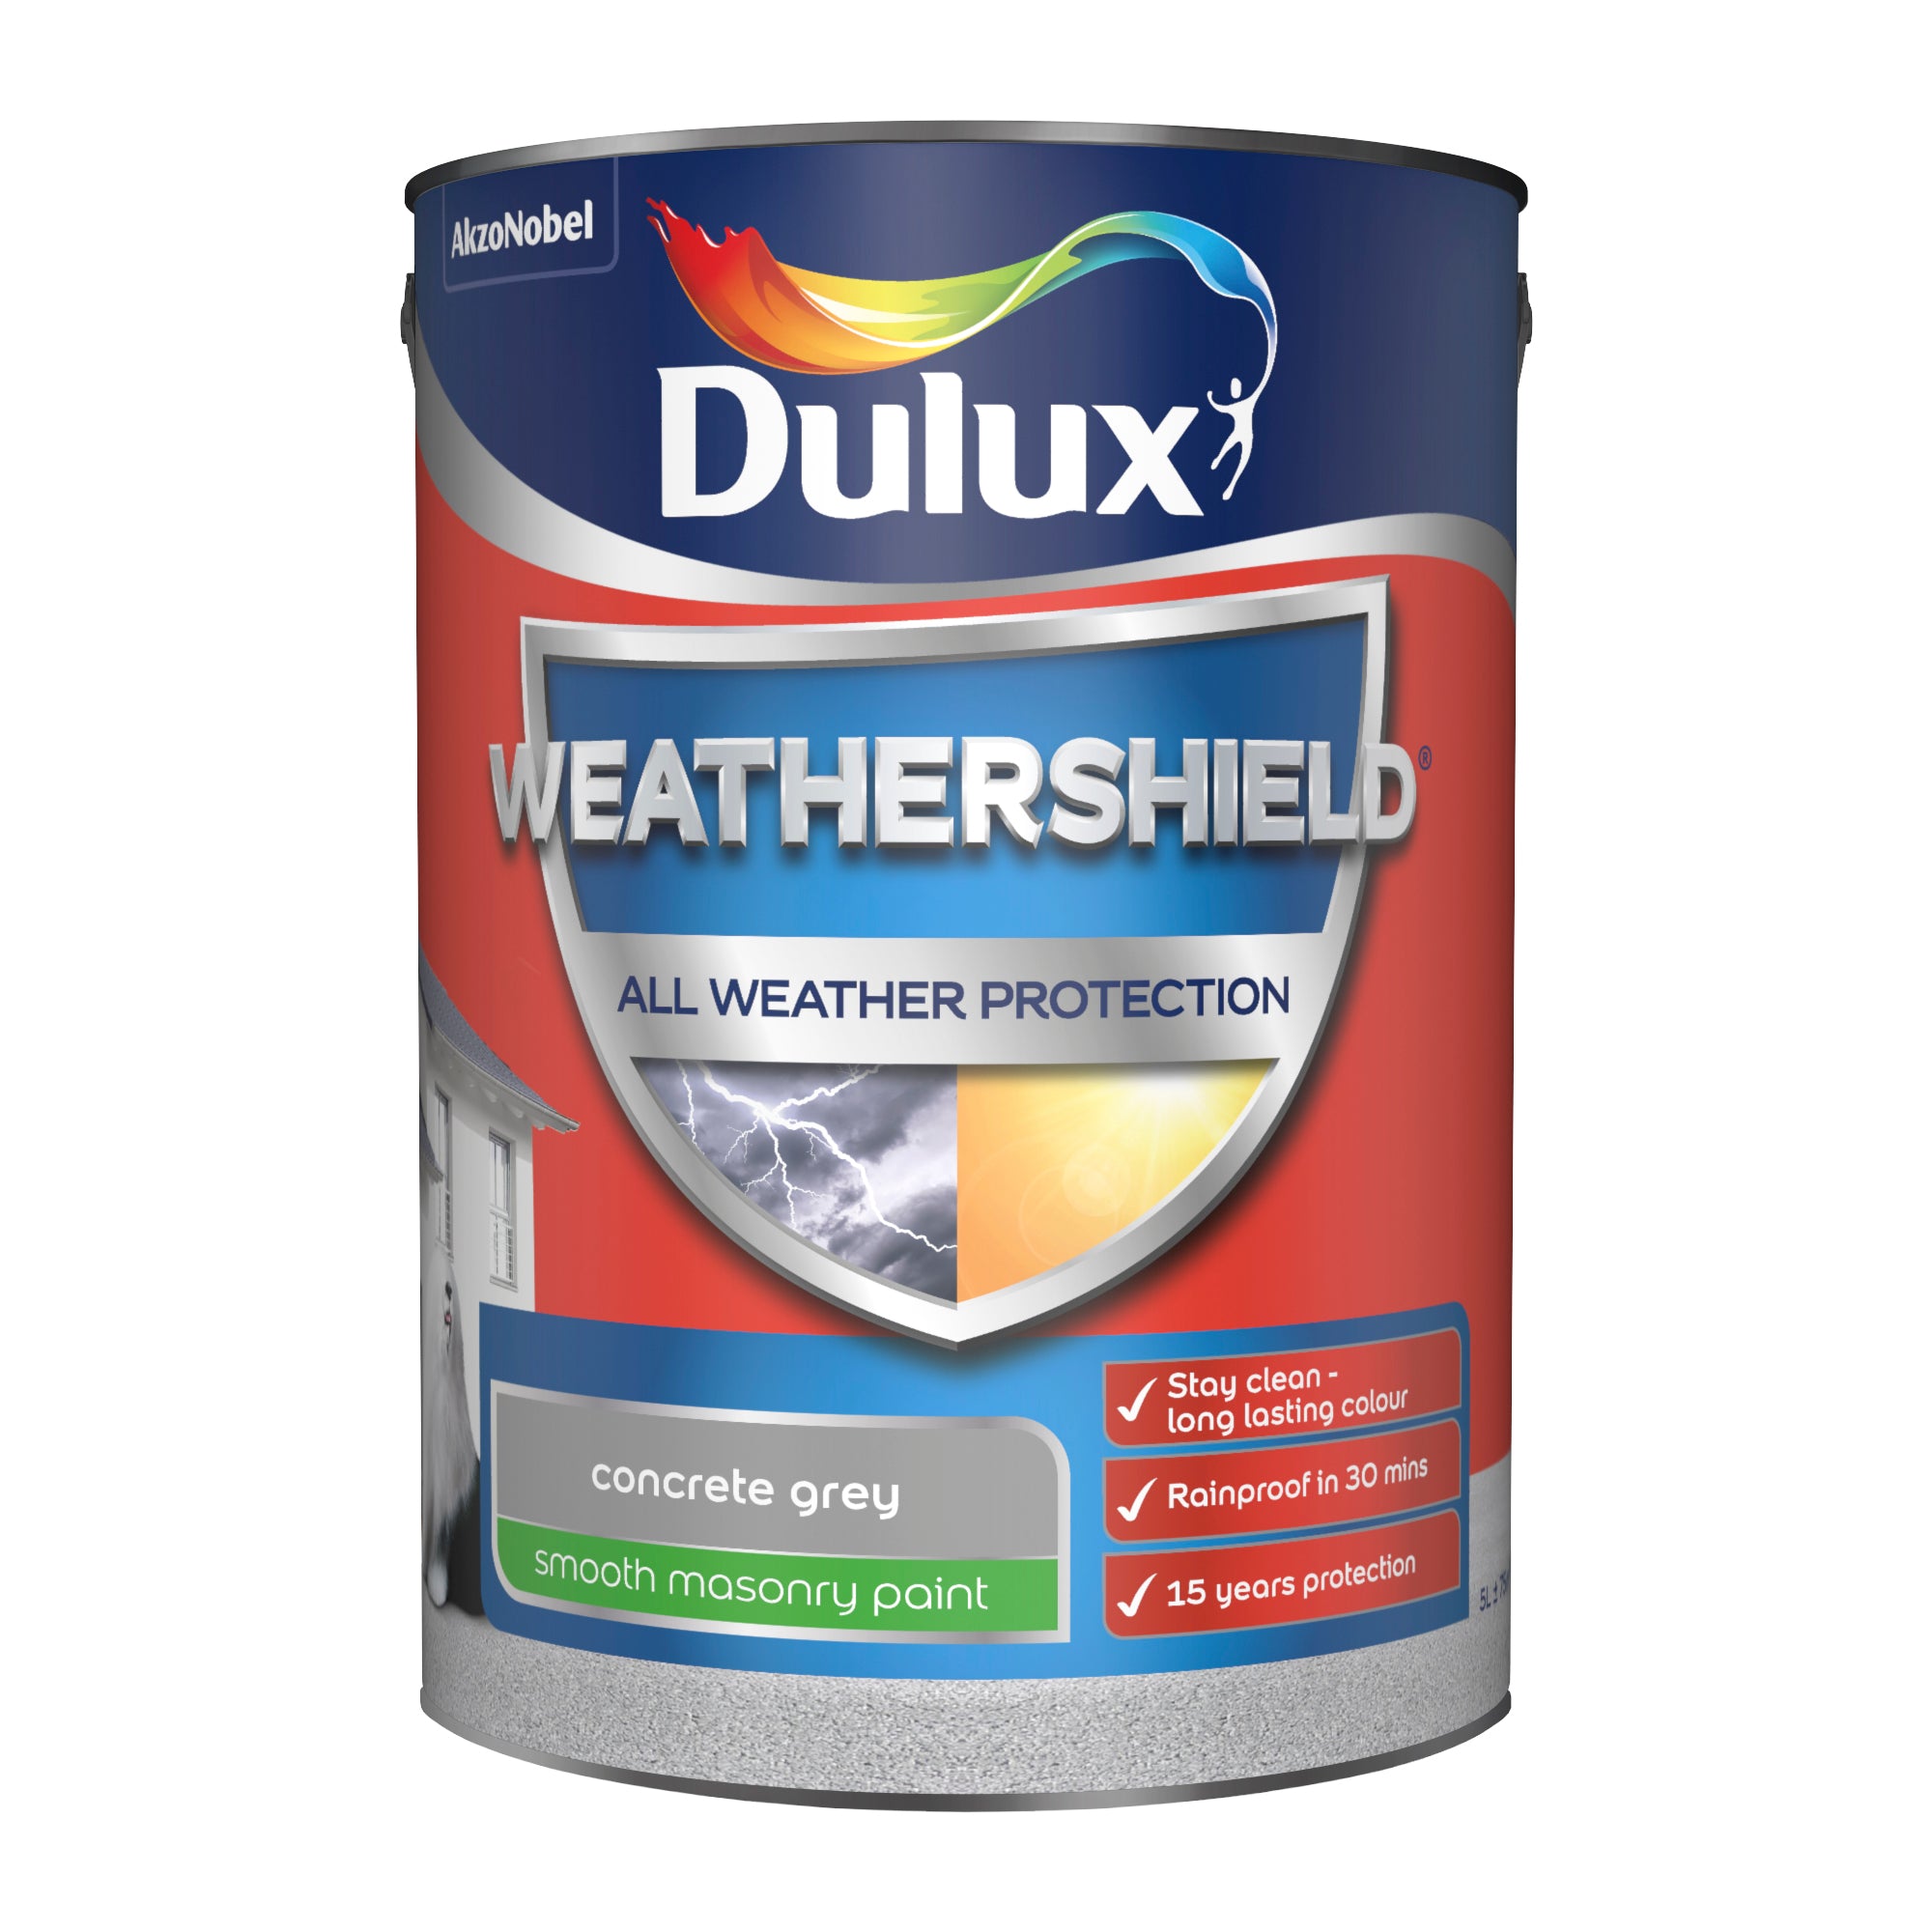 Dulux Weathershield All Weather Protection Smooth Concrete Grey 5L